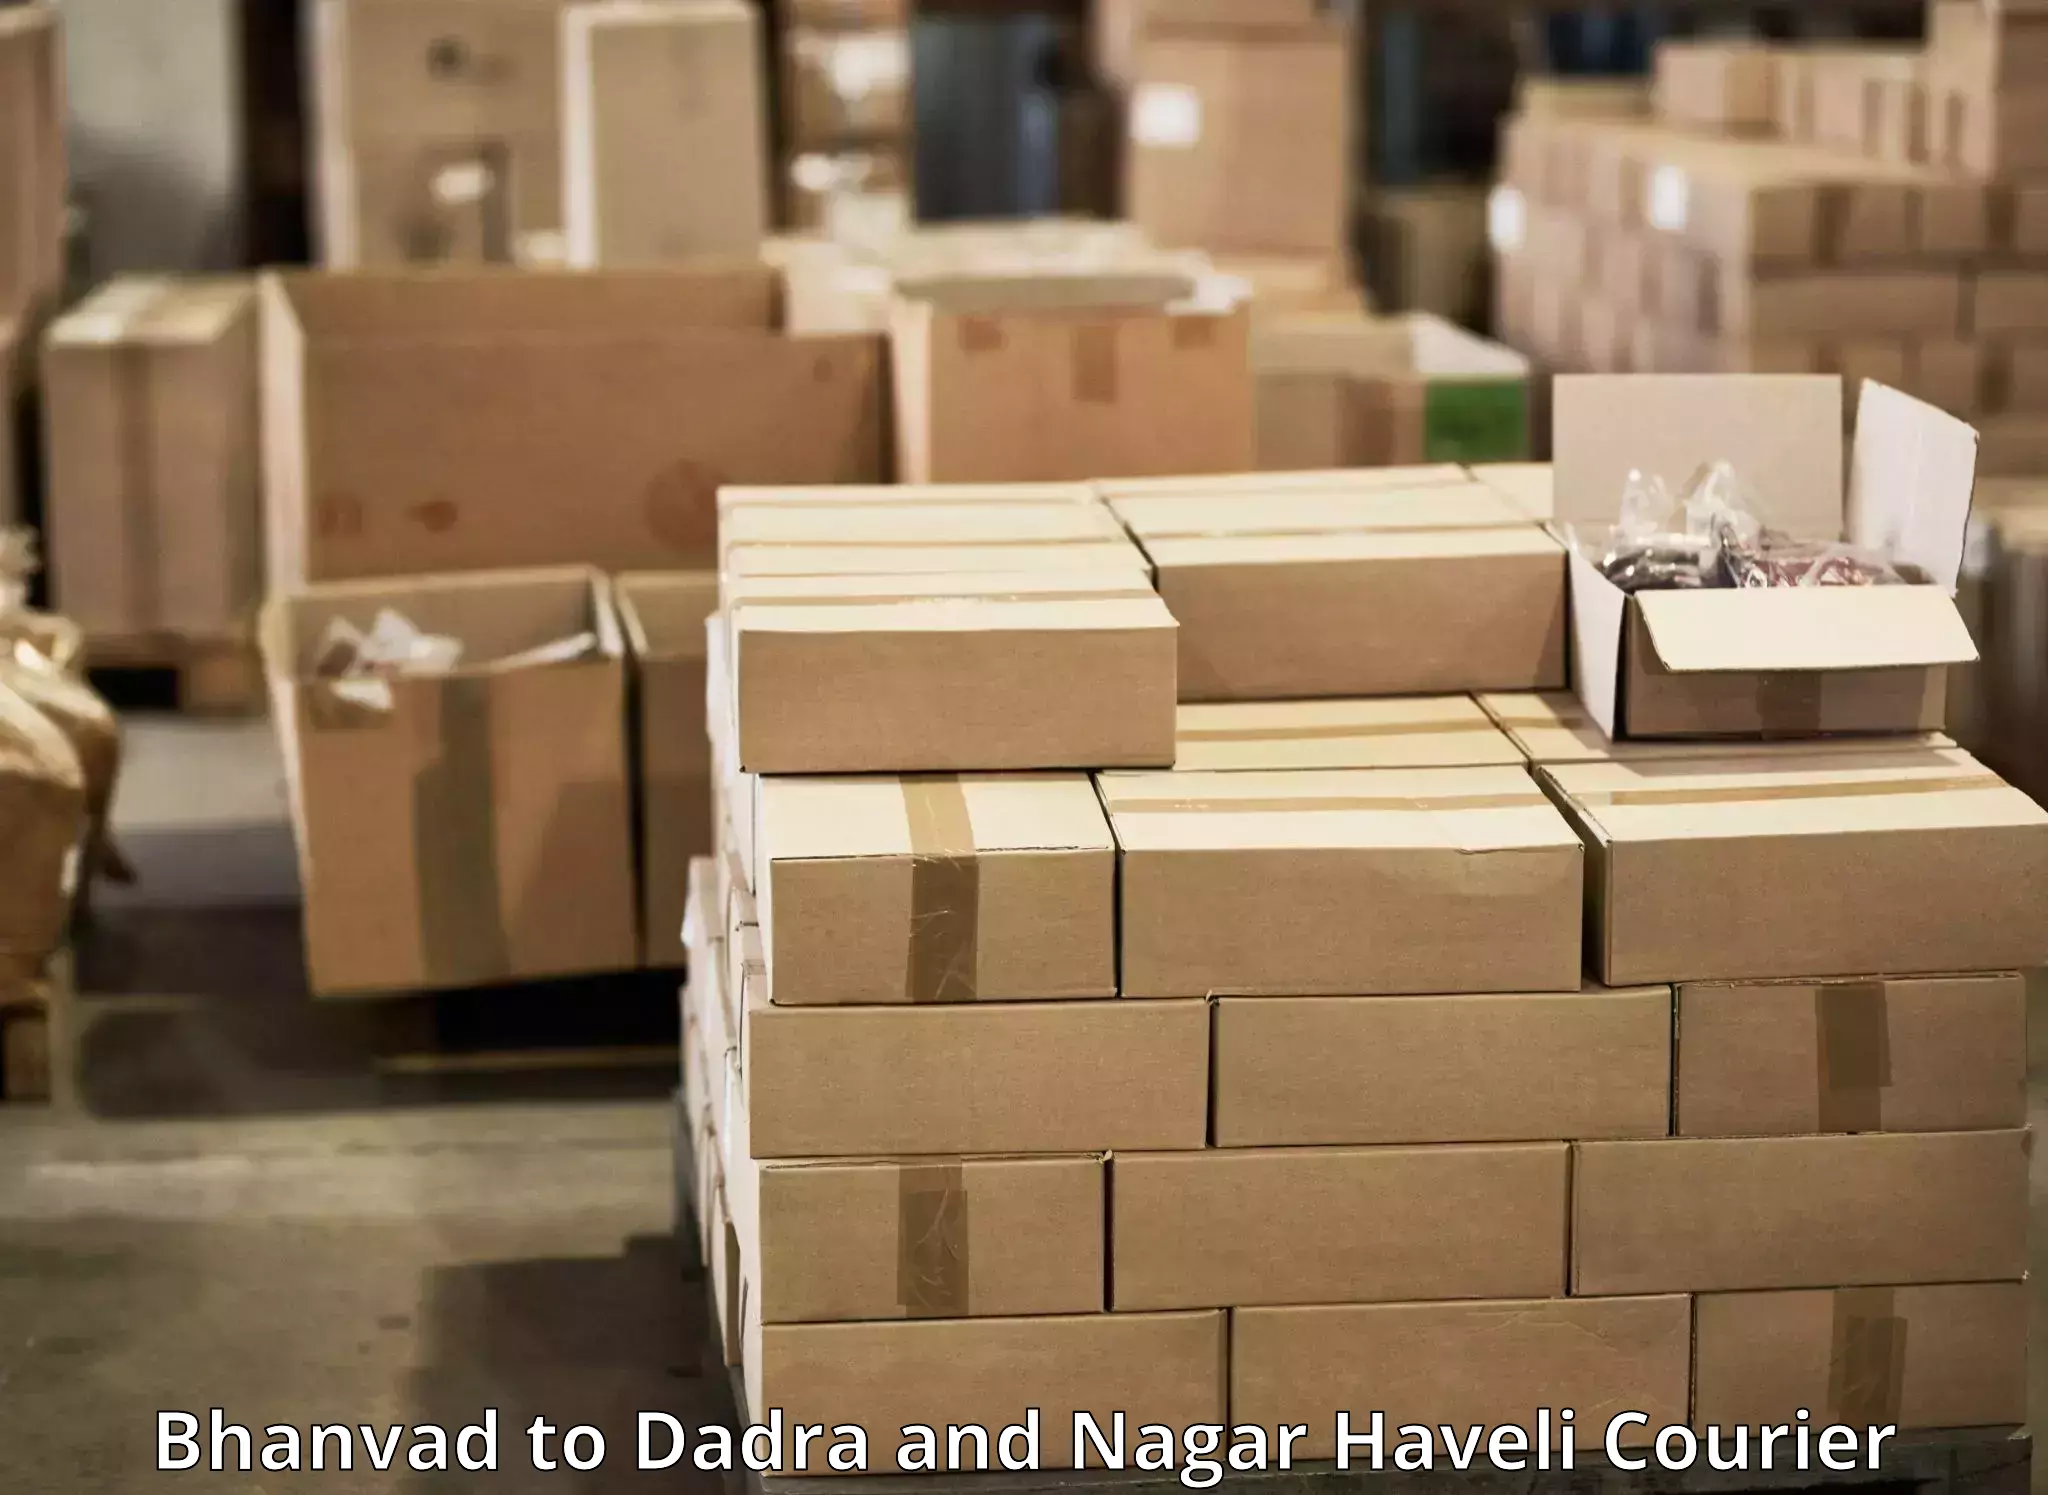 Efficient cargo services in Bhanvad to Dadra and Nagar Haveli